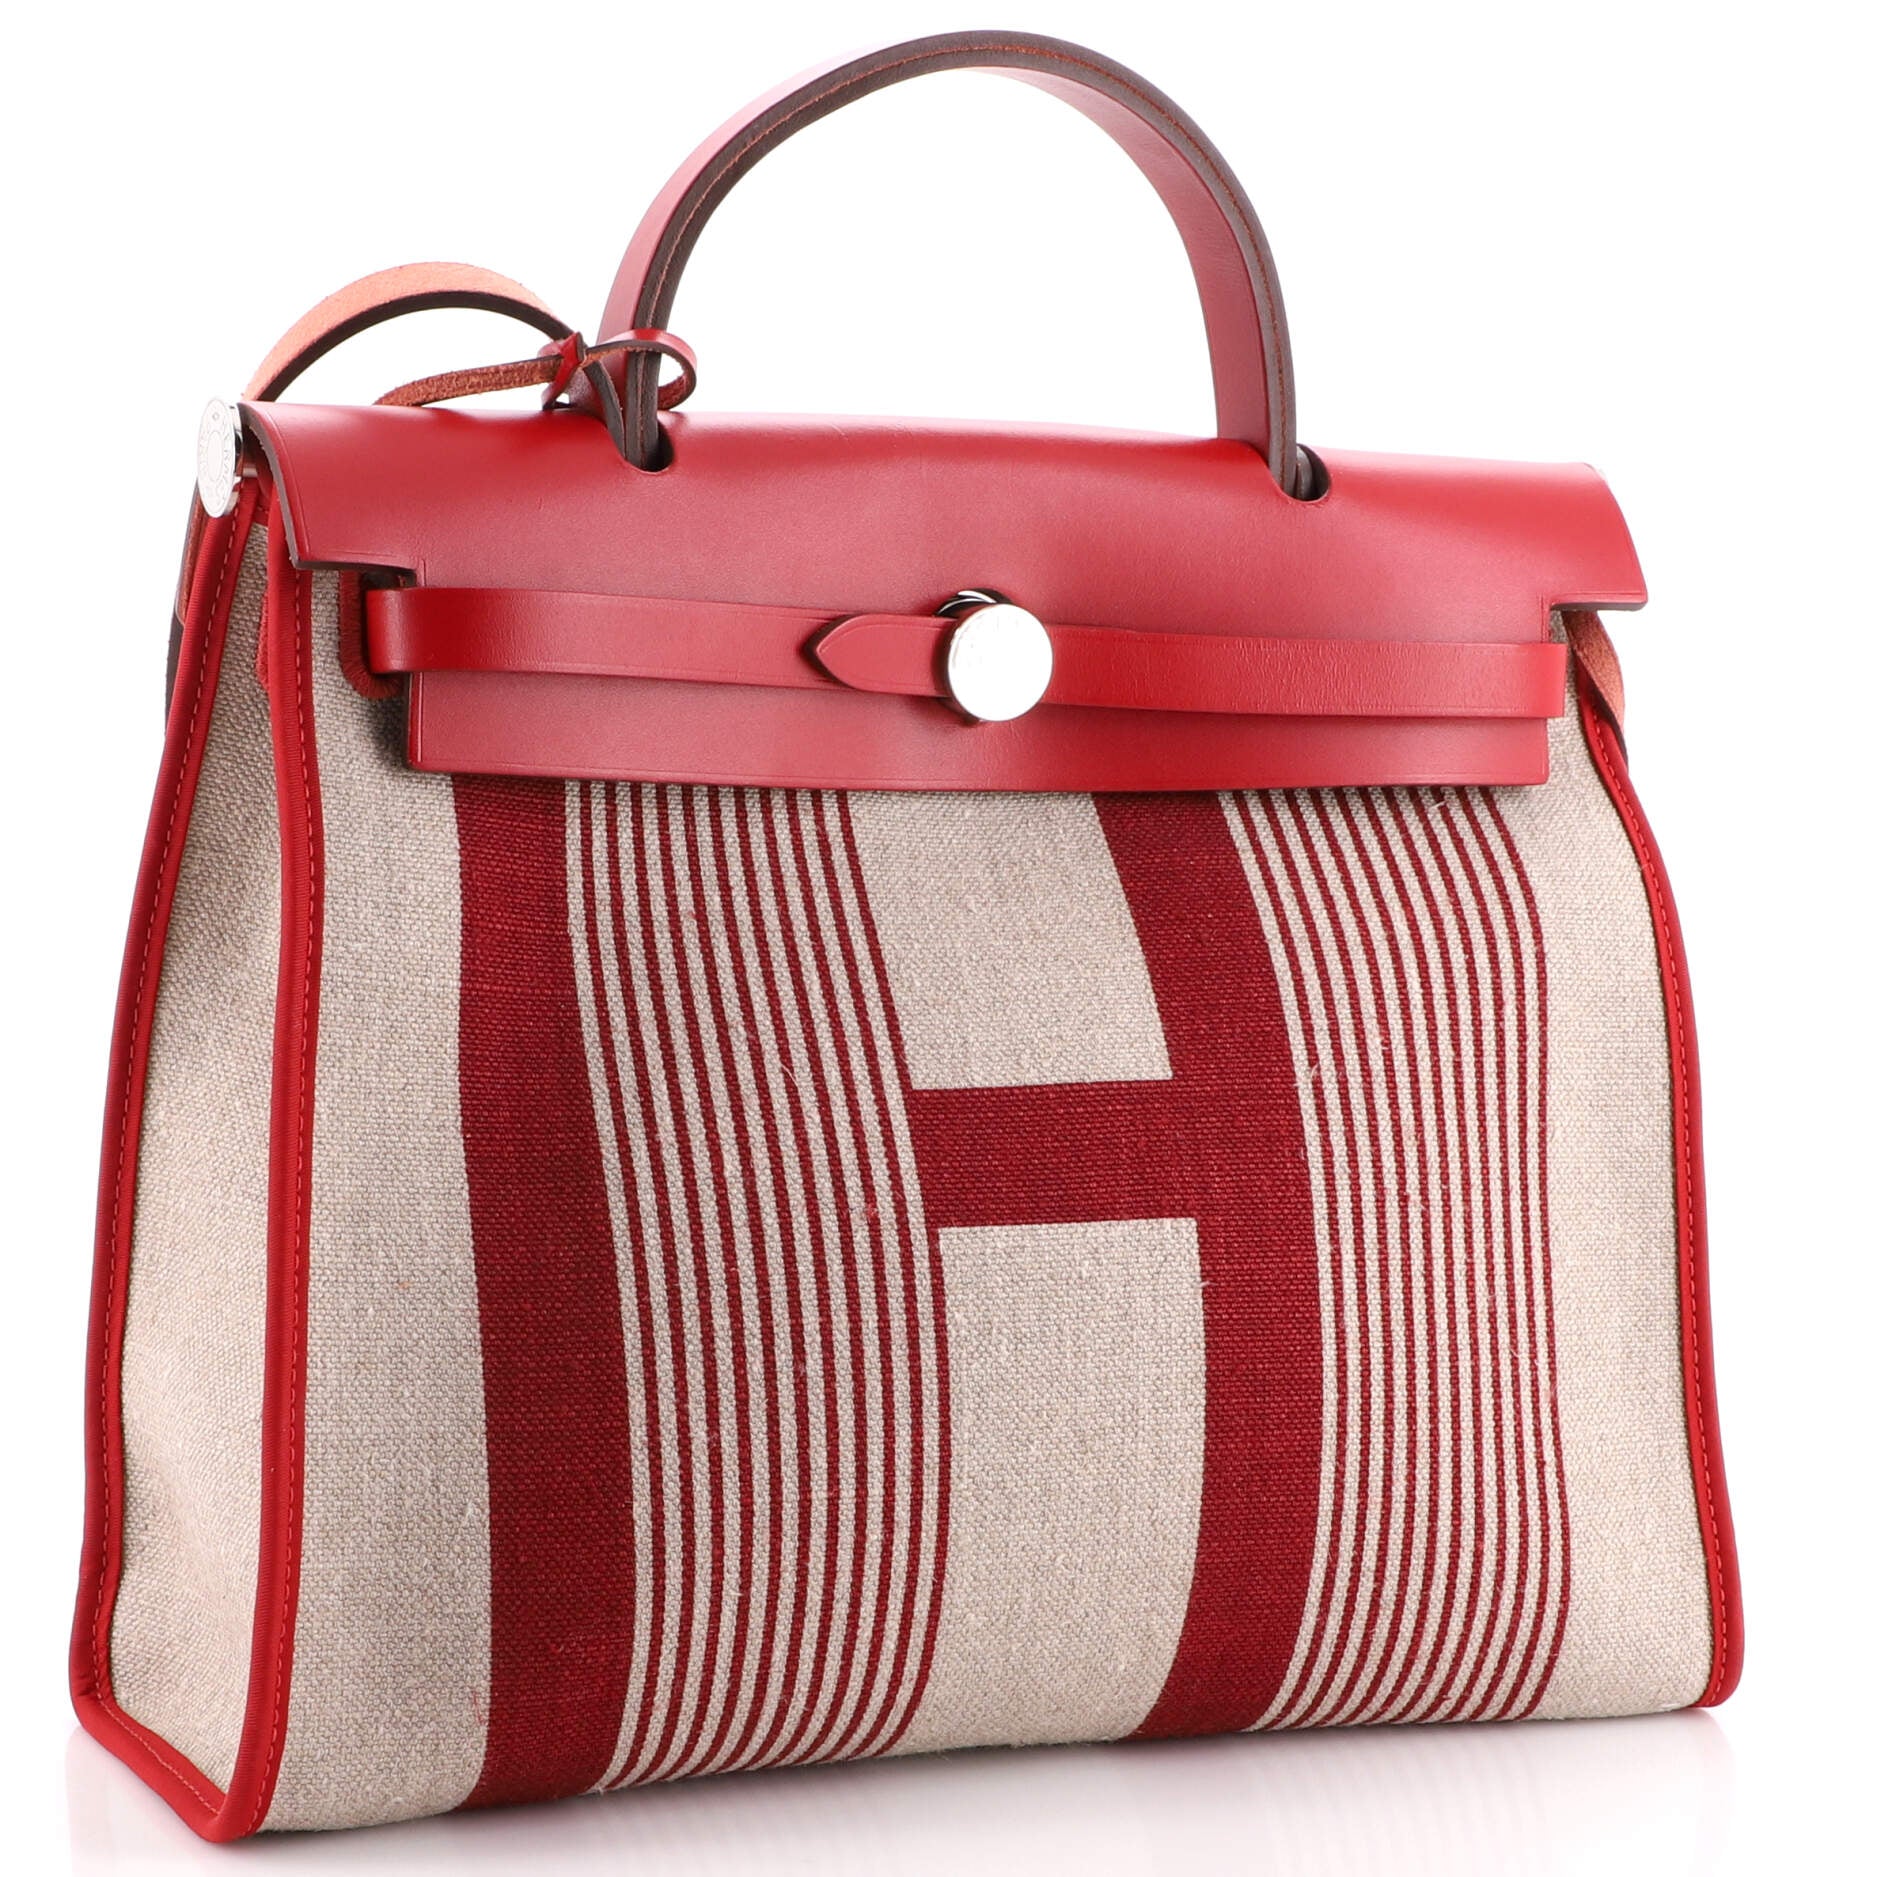 H Vibration Herbag Zip Printed Toile and Leather 31